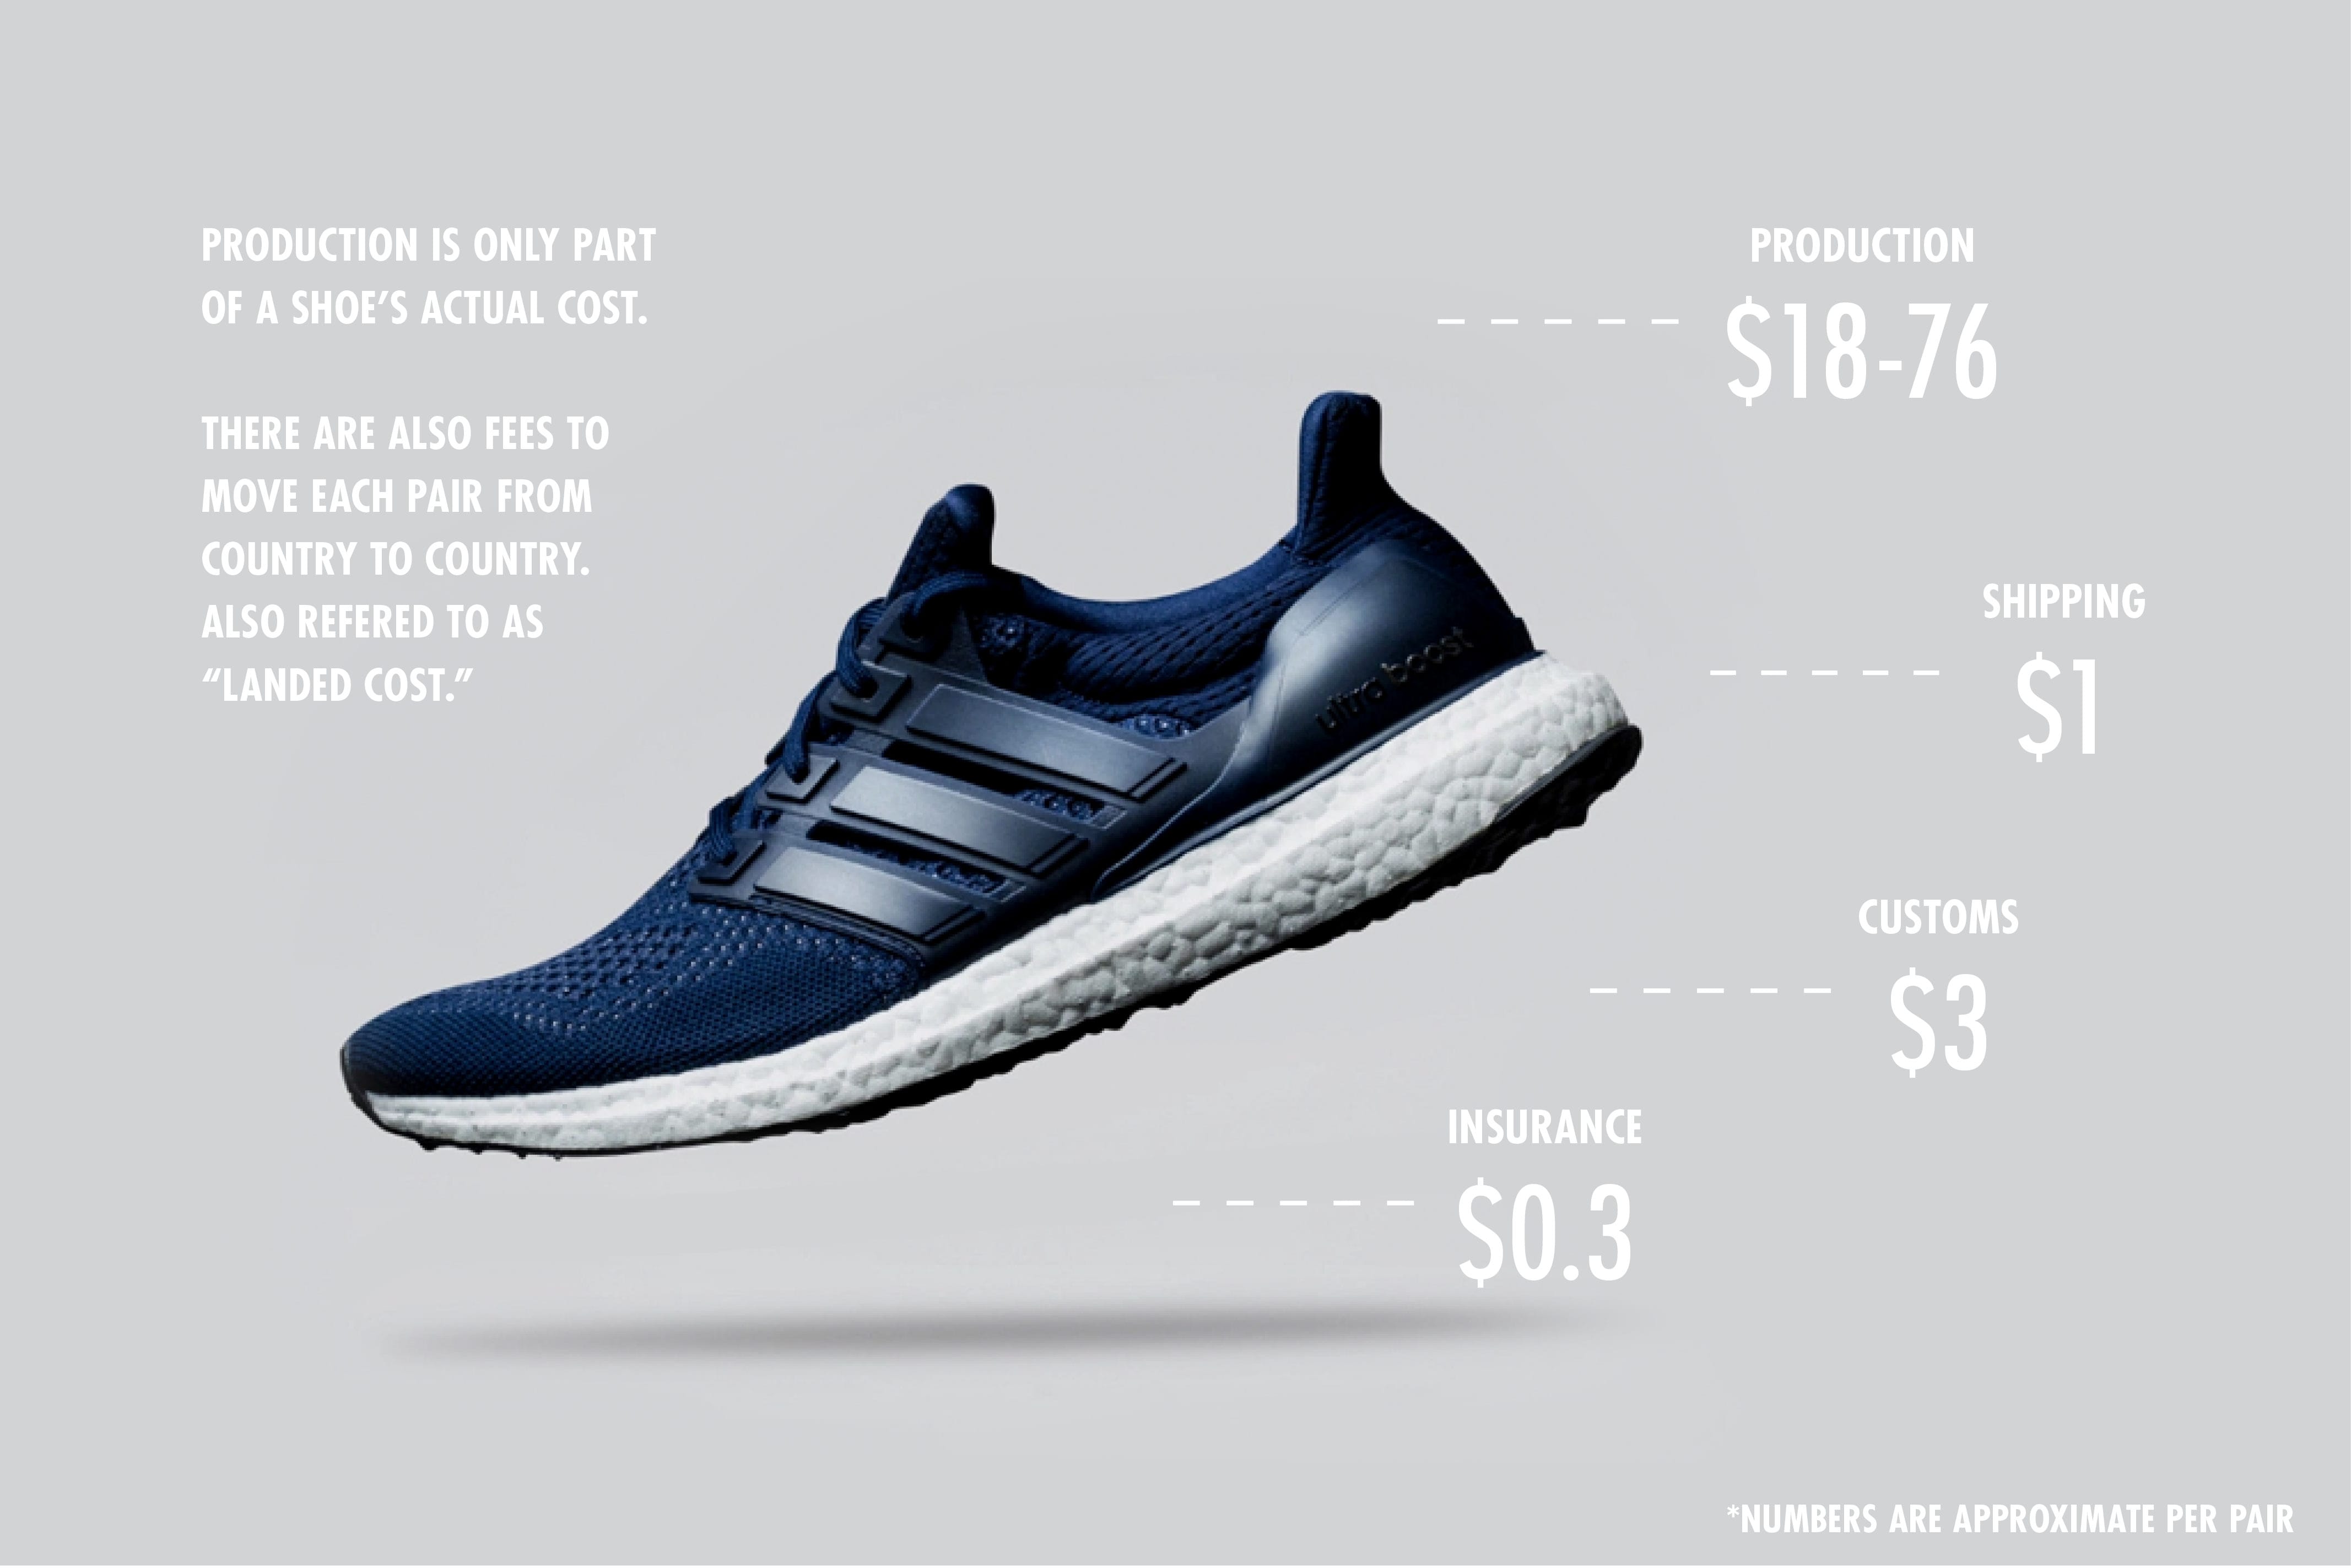 production cost of adidas shoes